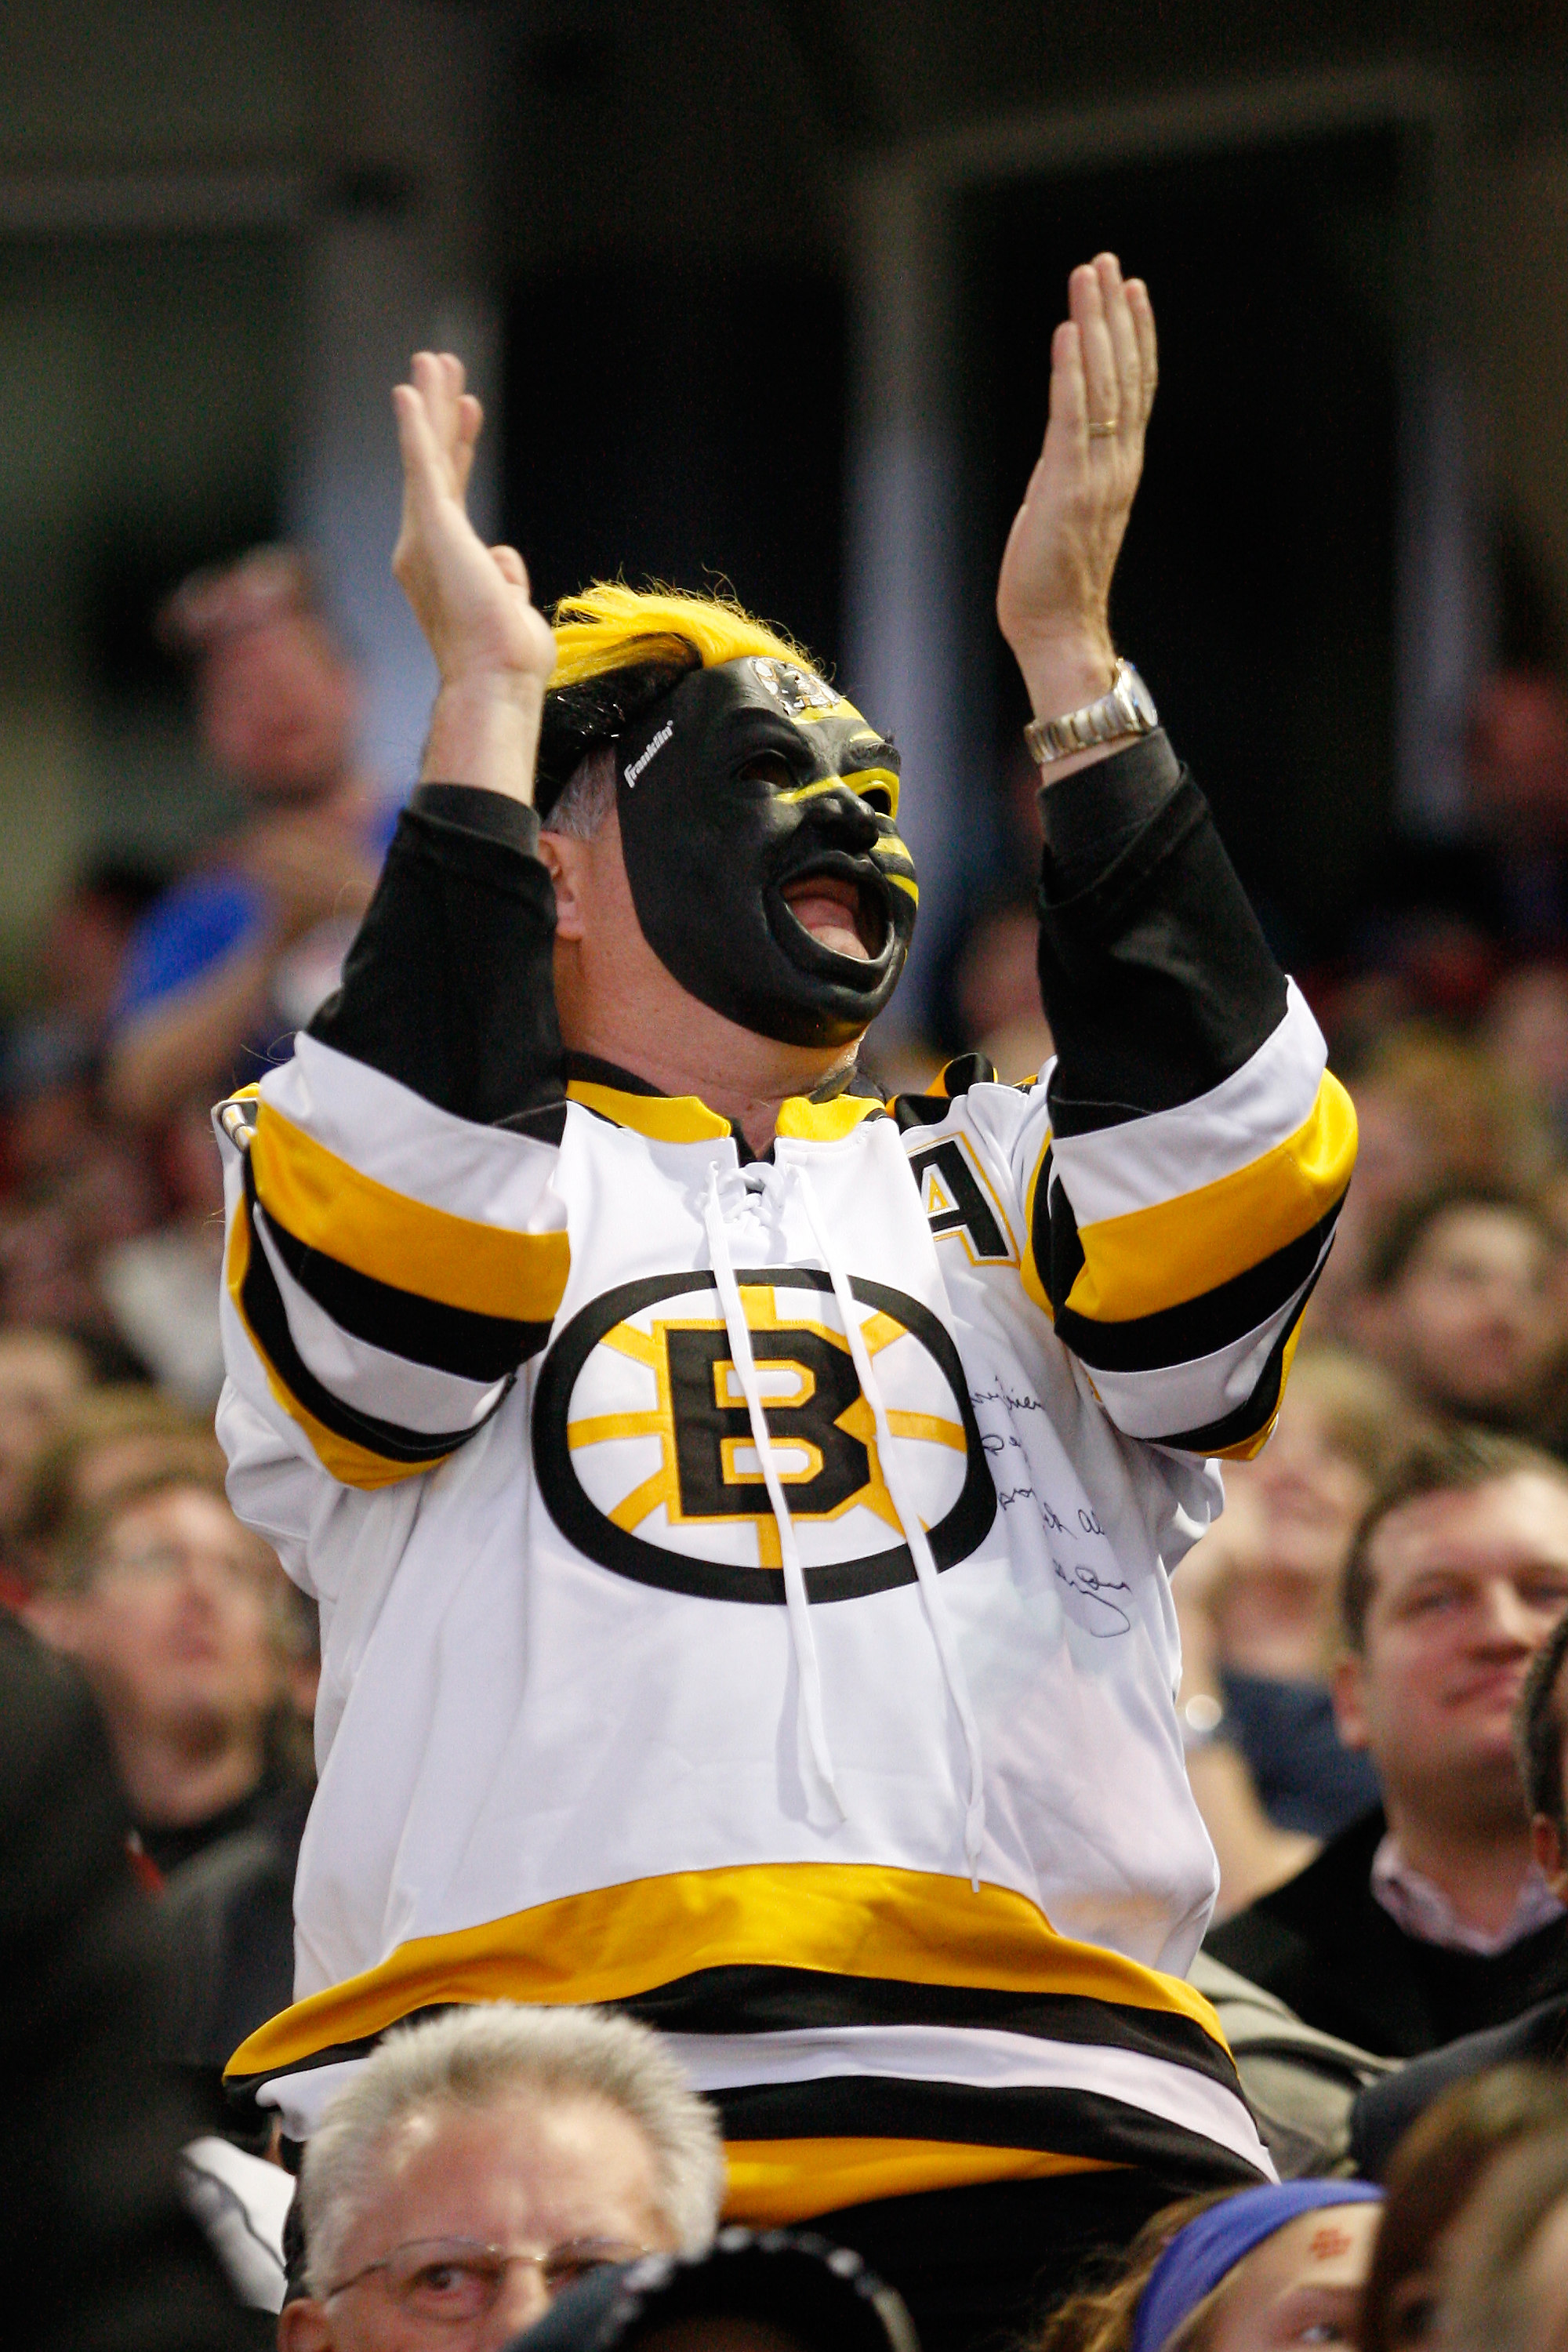 MONTREAL, CANADA - JANUARY 8:  A Boston Bruins fan celebrates the Bruins first goal of the game during the NHL game against the Montreal Canadiens at the Bell Centre on January 8, 2011 in Montreal, Quebec, Canada.  (Photo by Richard Wolowicz/Getty Images)